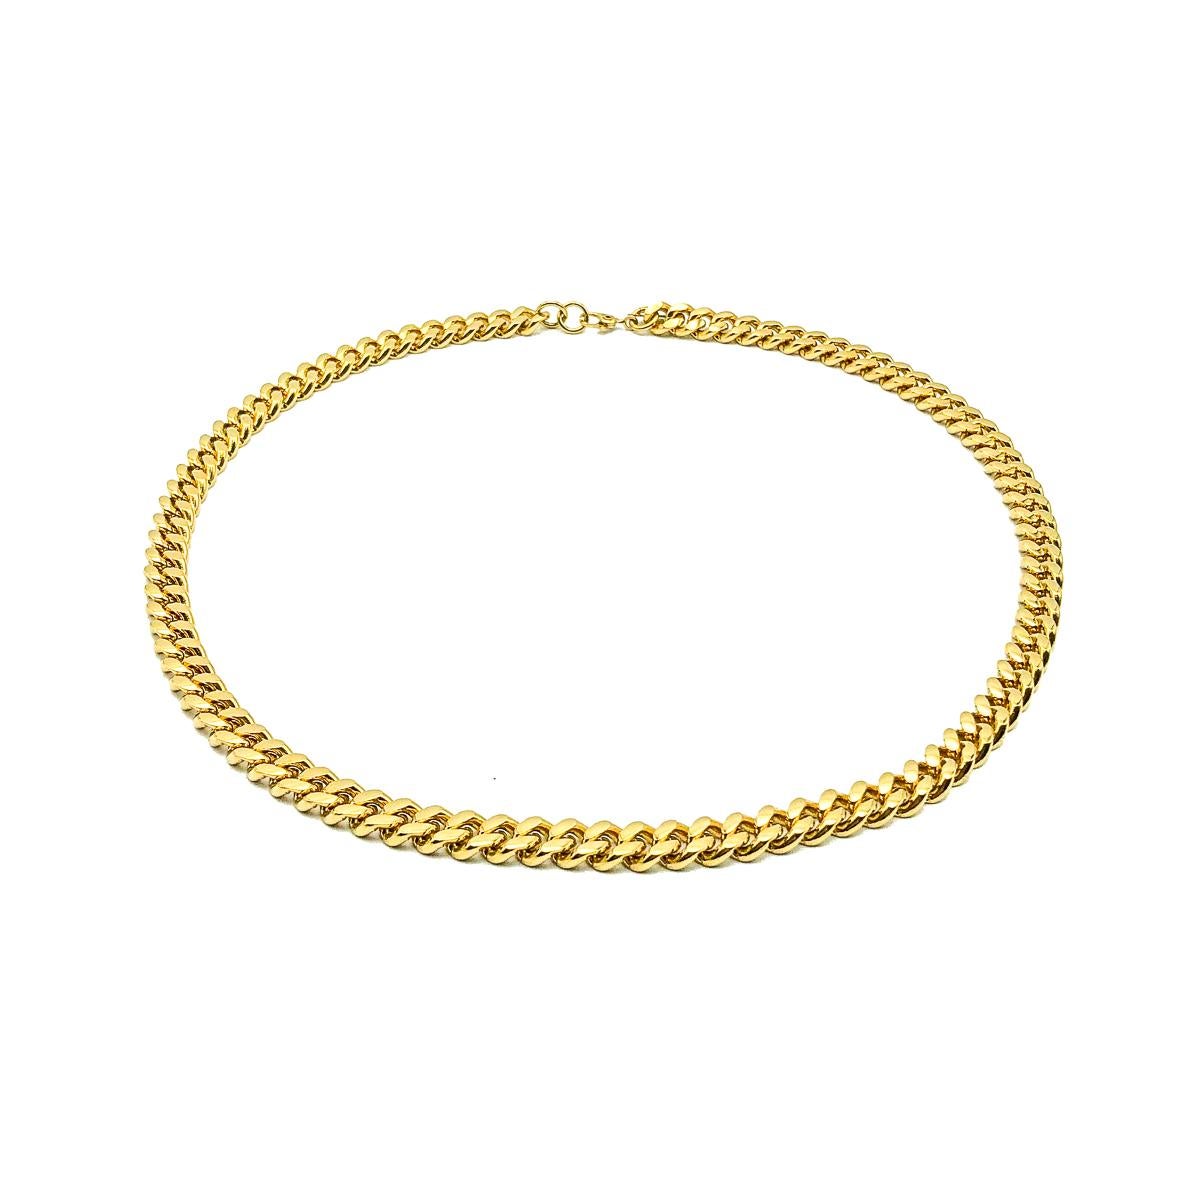 A Vintage Monet Flattened Curb Link Chain. Crafted in gold plated metal. Substantial and wonderful quality. Very good vintage condition, signed, 45cms. Wonderfully stylish for all occasions. 

Established in 2016, this is a British brand that is